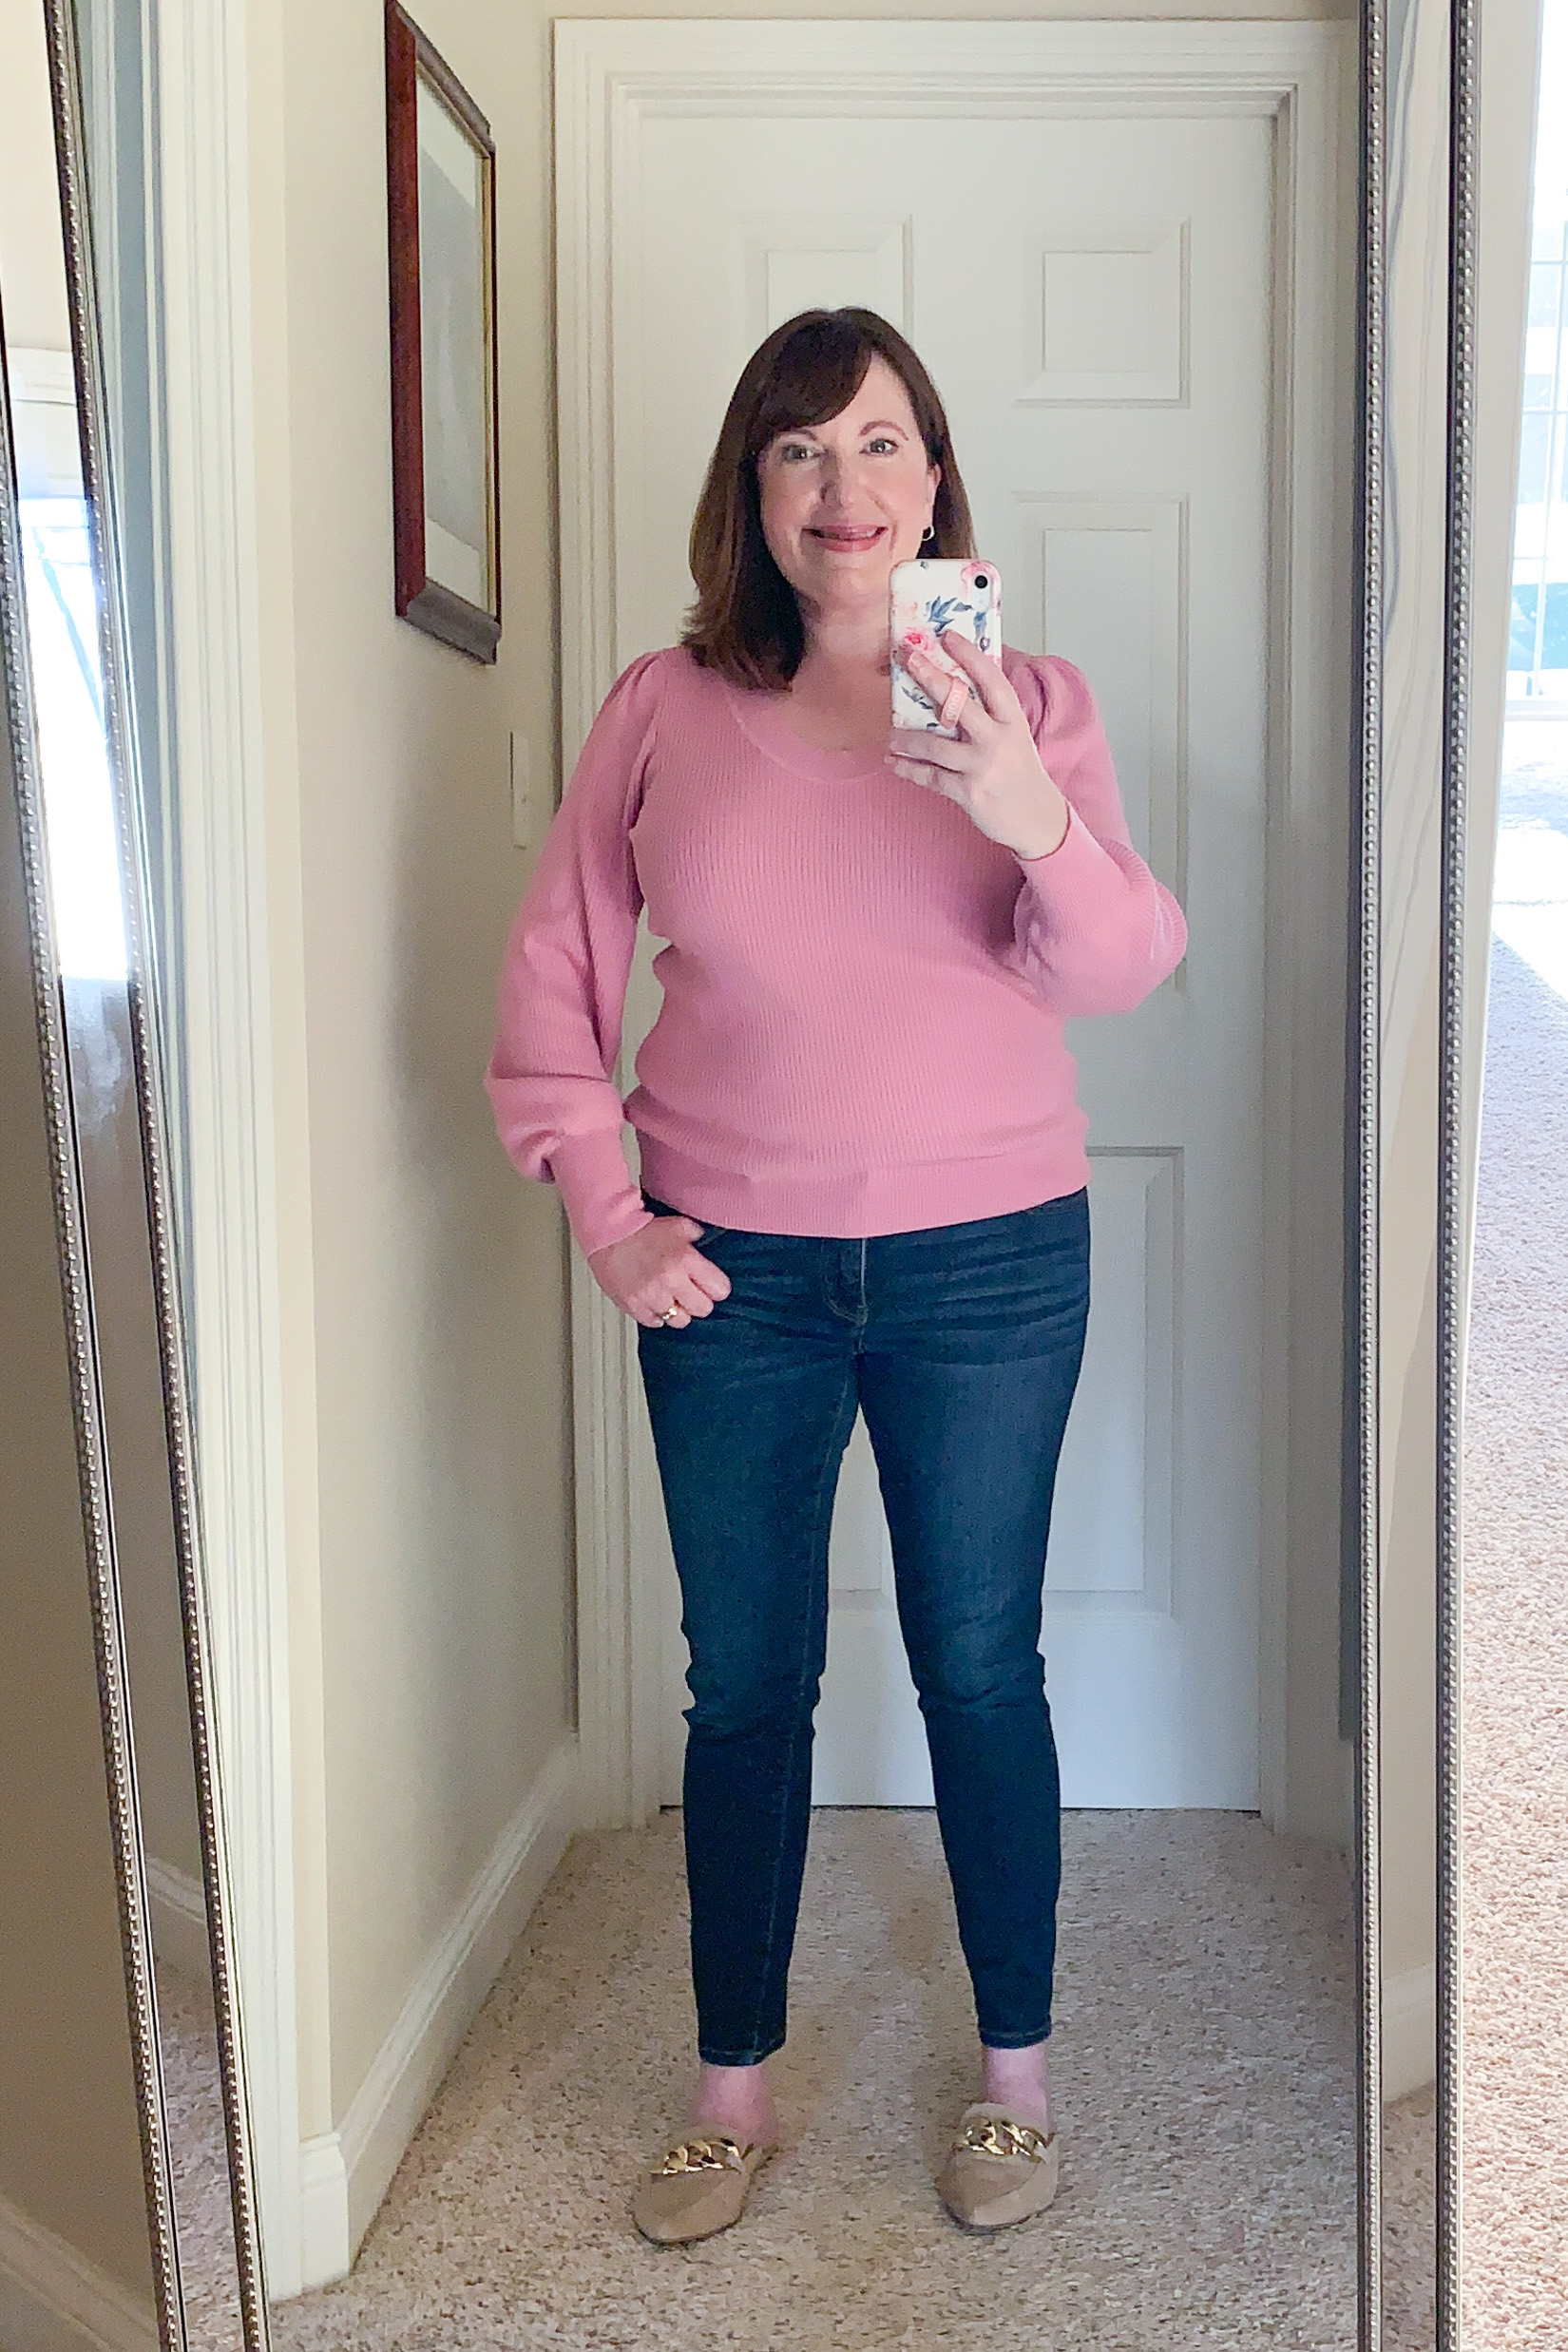 Try-On Session – A Sweater & Athleisure Wear